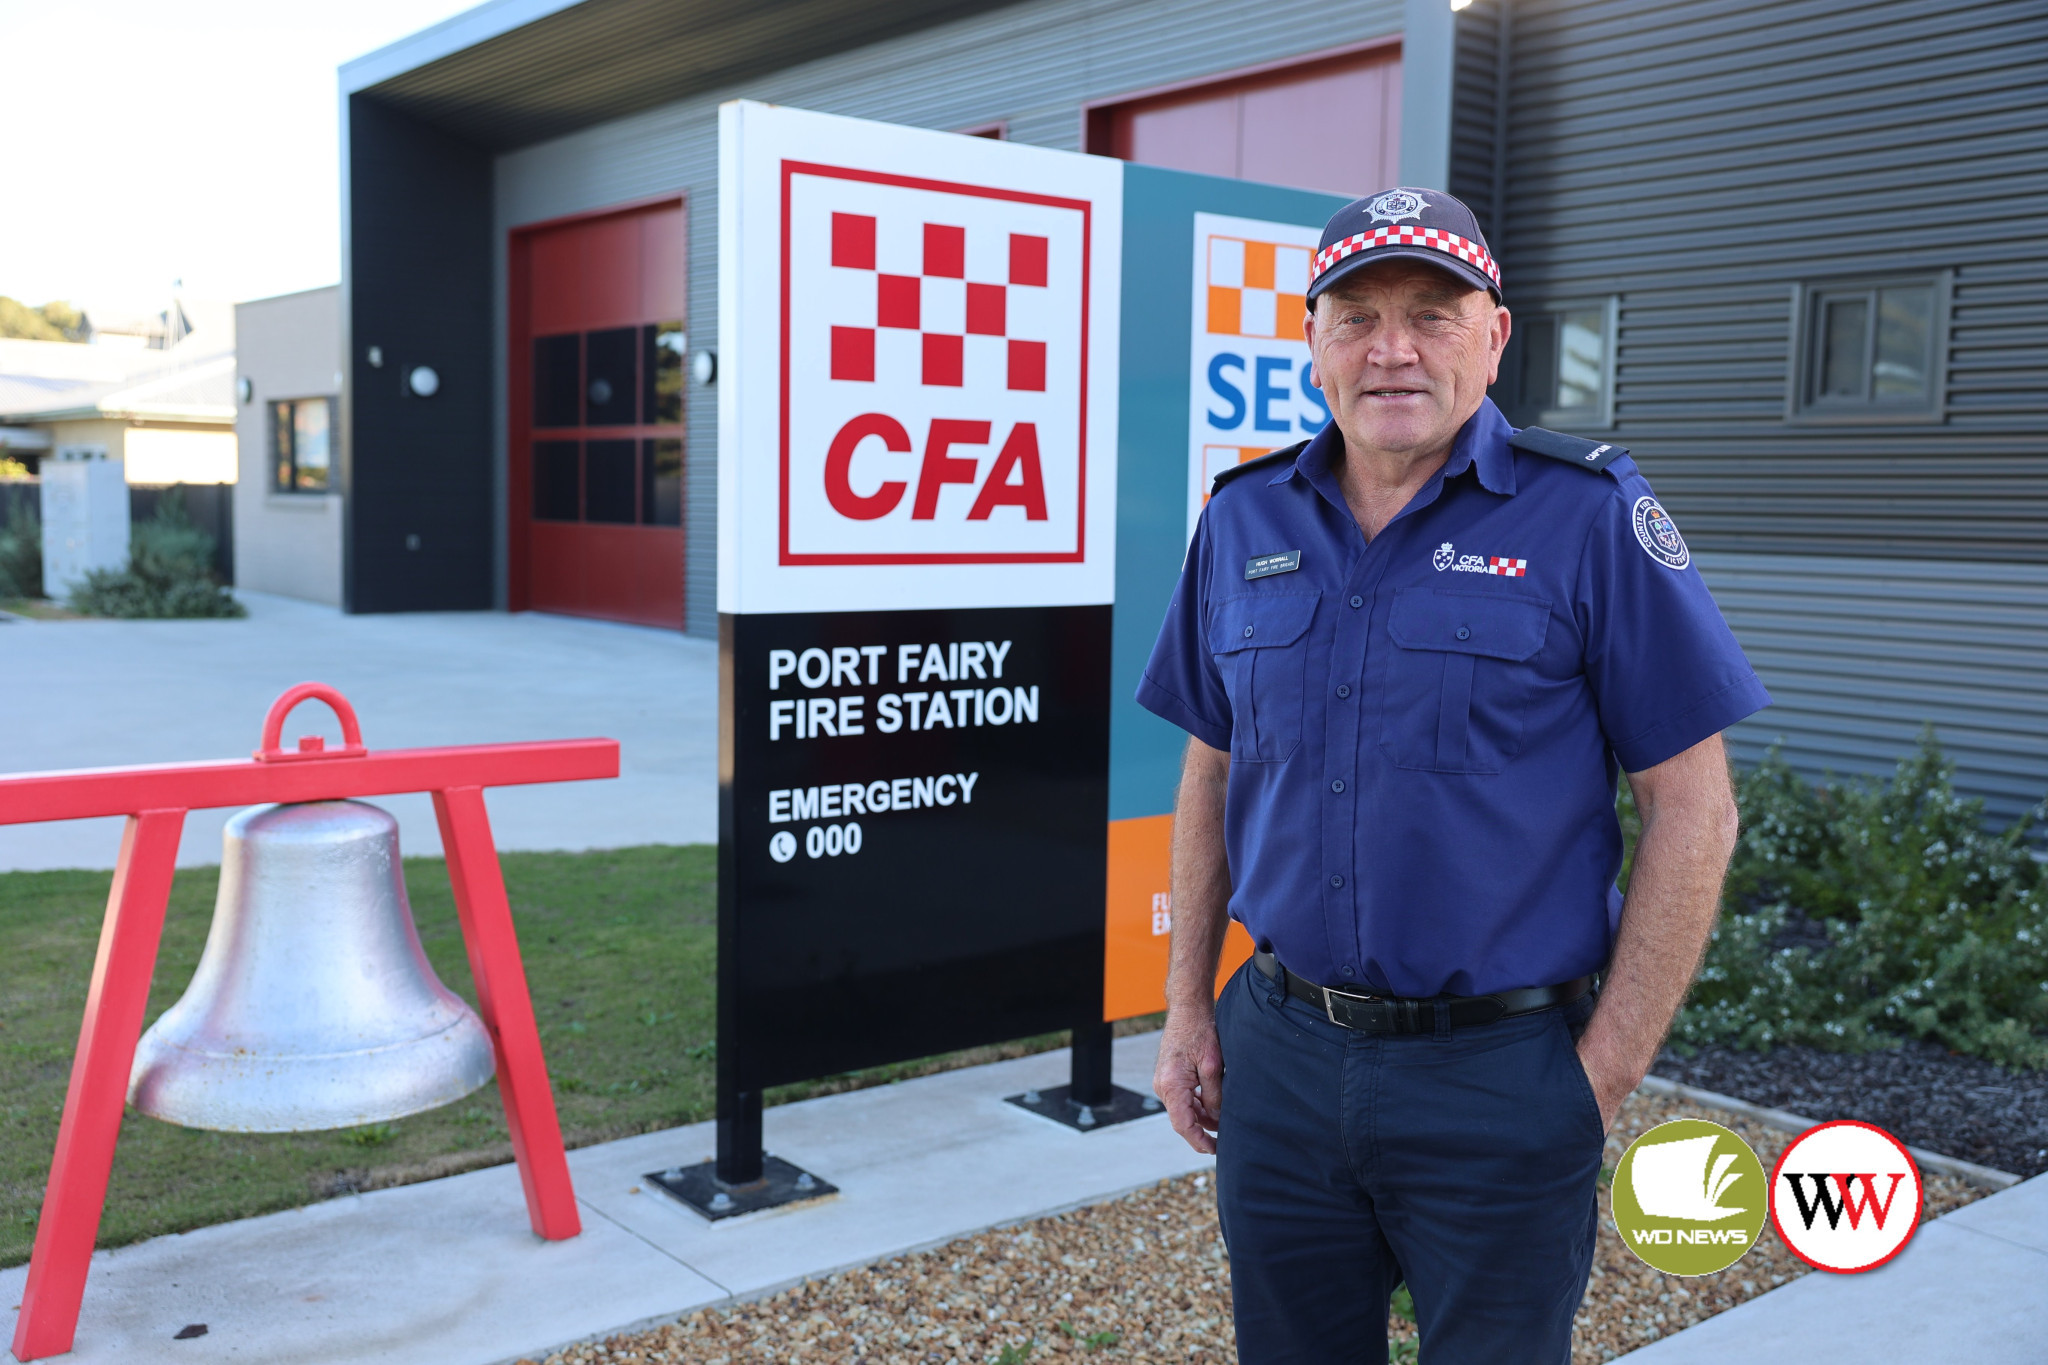 Volunteers are the heart of any community. Their selfless contributions are appreciated far and wide and this week, May 20-26, is National Volunteer Week – our chance to recognise and say thanks to those like Port Fairy CFA Captain Hugh Worrell.